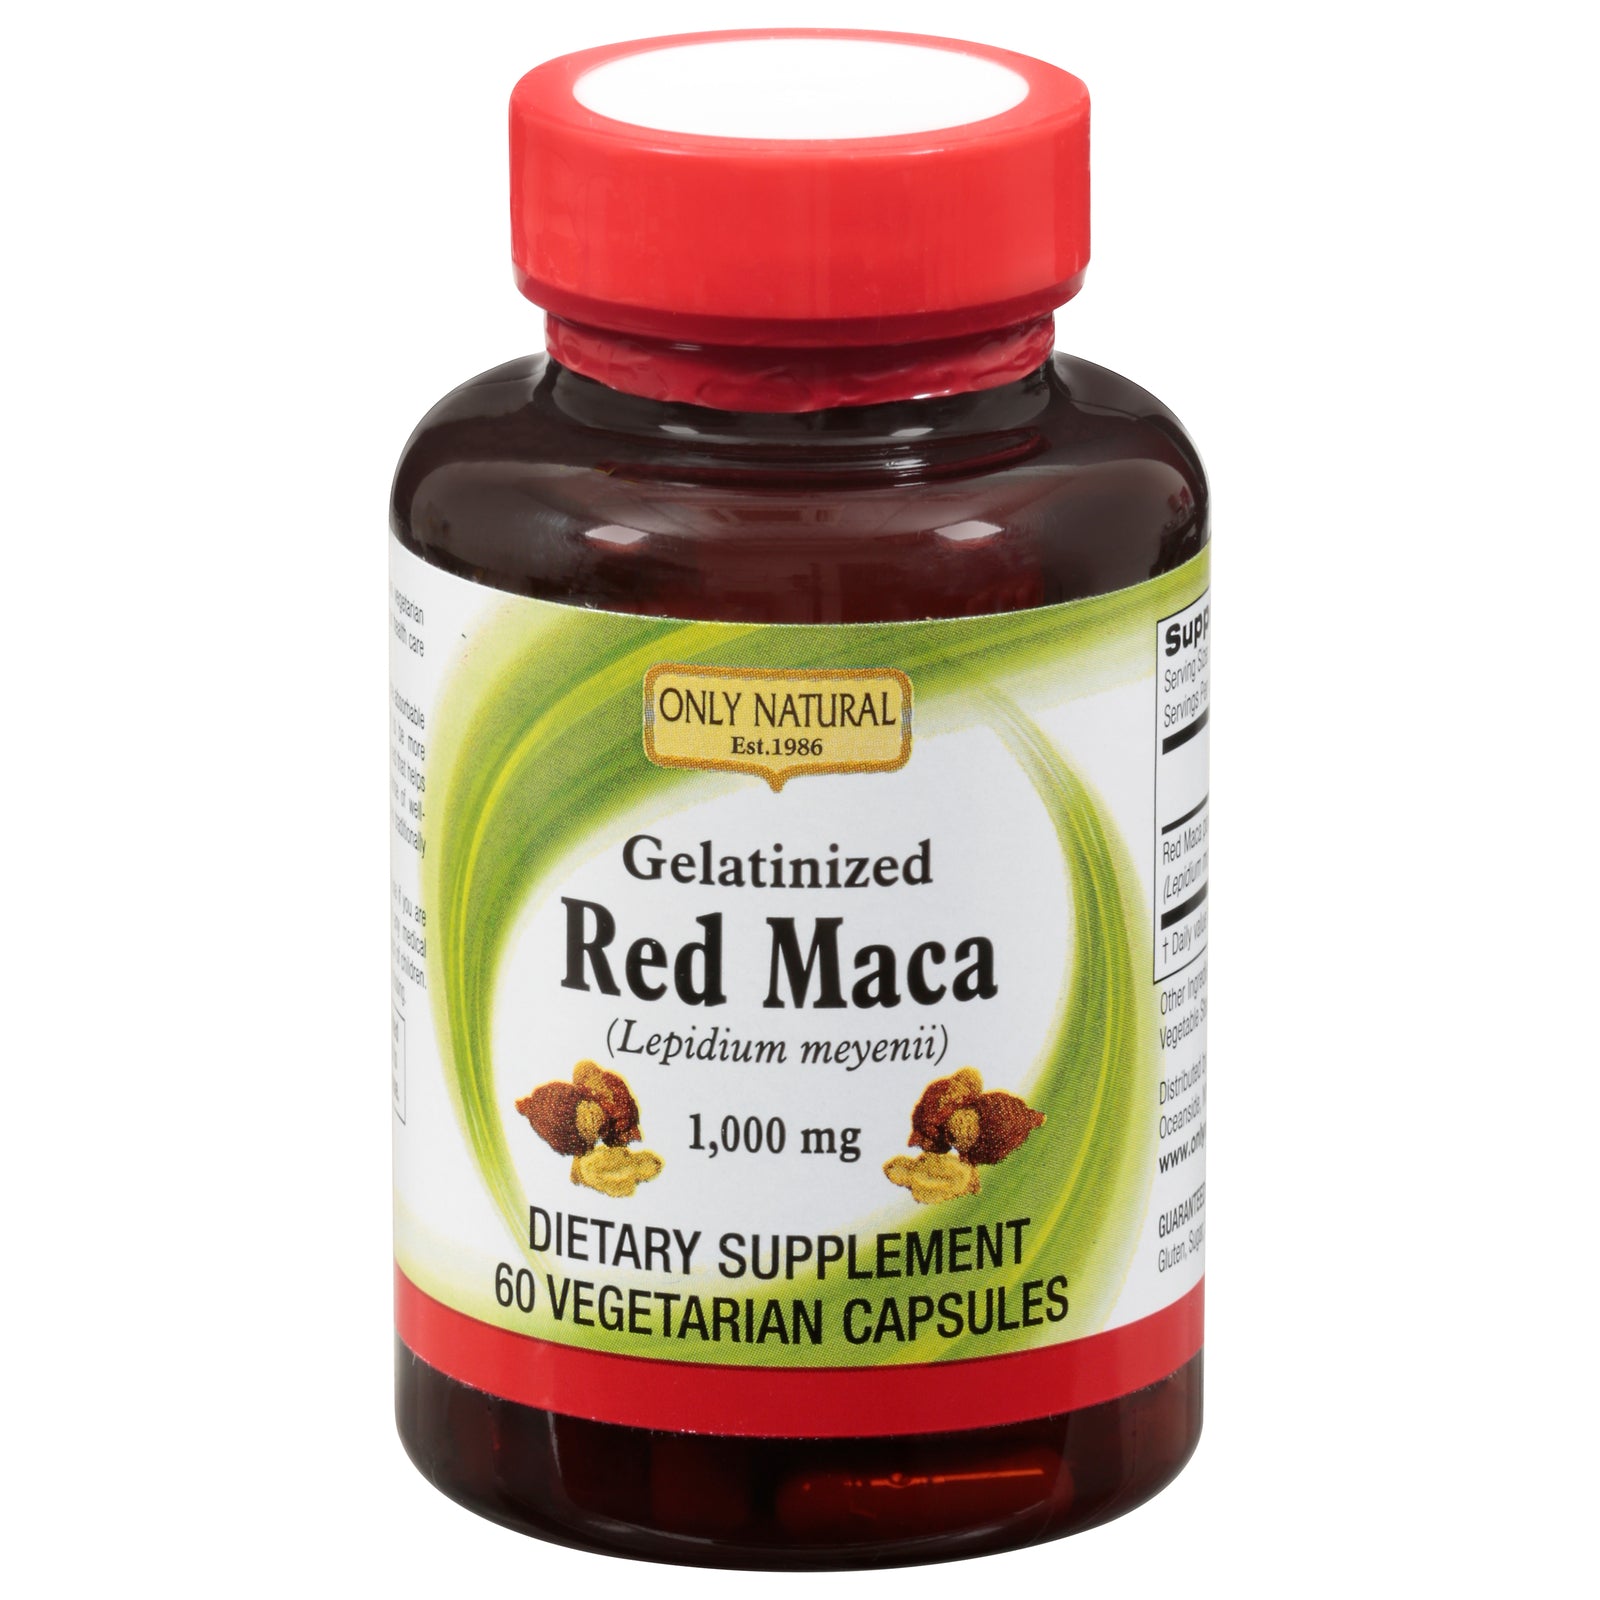 Only Natural - Red Maca Gelatinized - 1 Each - 60 Vcap